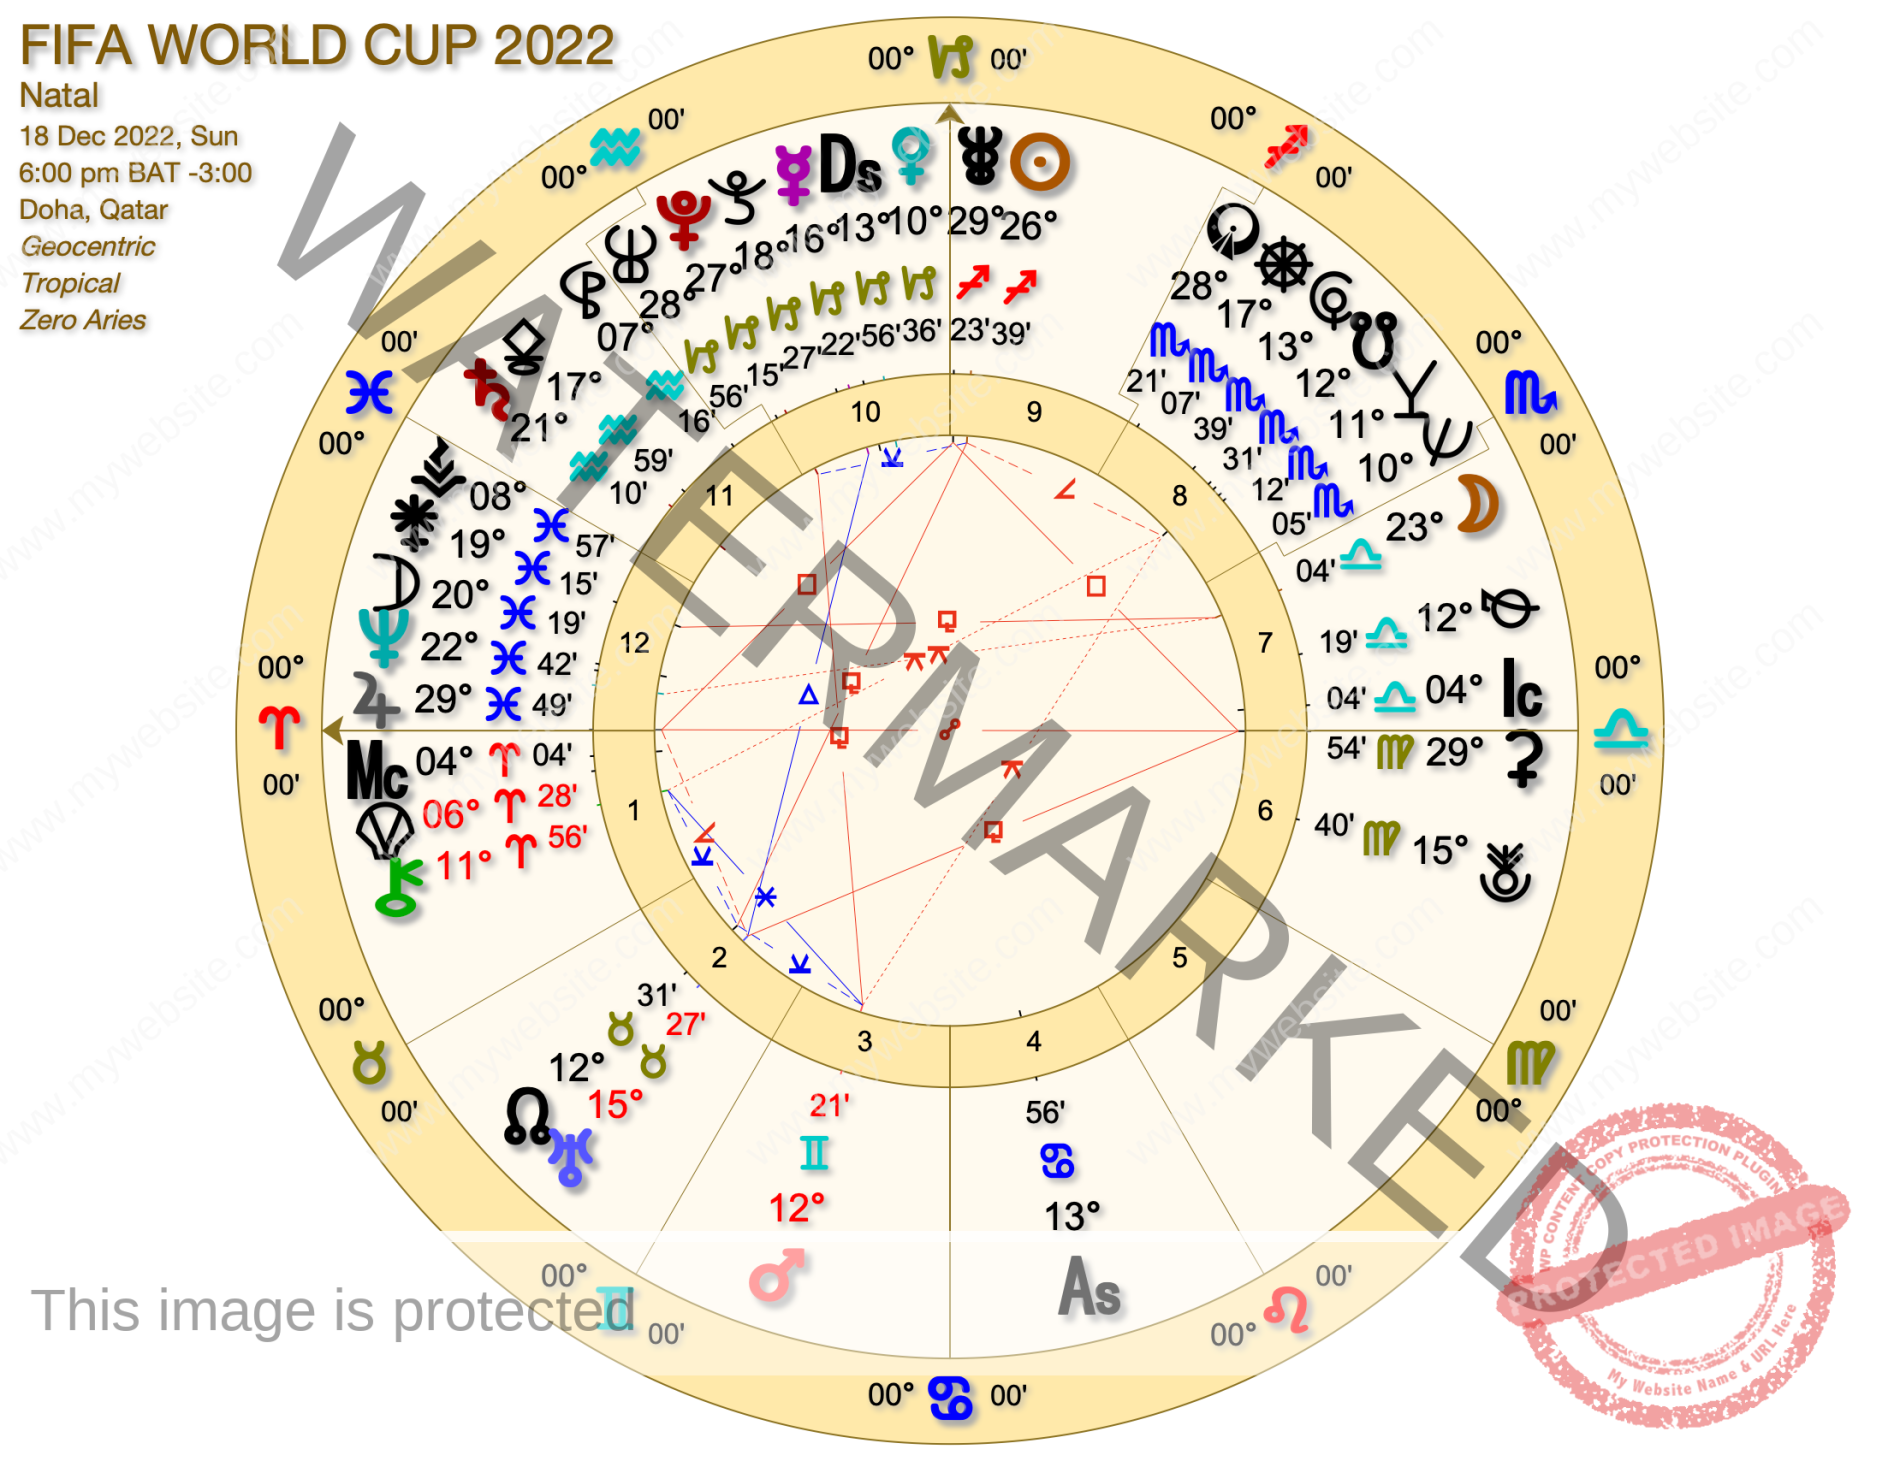 FIFA WORLD CUP FINAL 2022 - The Astrology of World Cup 2022